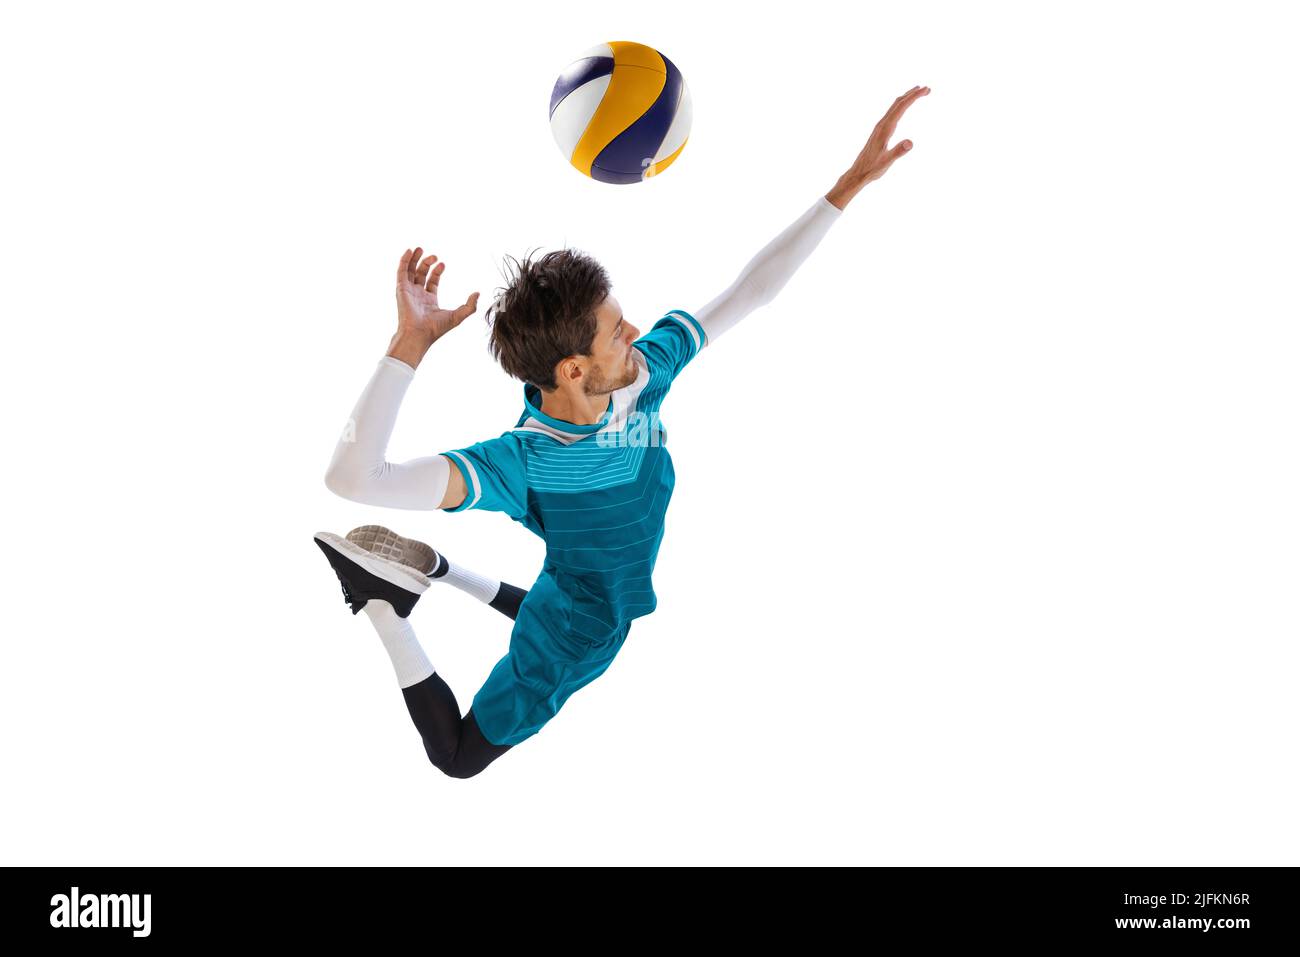 Free Images : play, train, young, training, exercise, together, movement,  competition, sporty, championship, network, fairness, athlete, active, ball  sports, playing field, team sport, volley, sports hall, team sports,  volleyball field, volleyball net